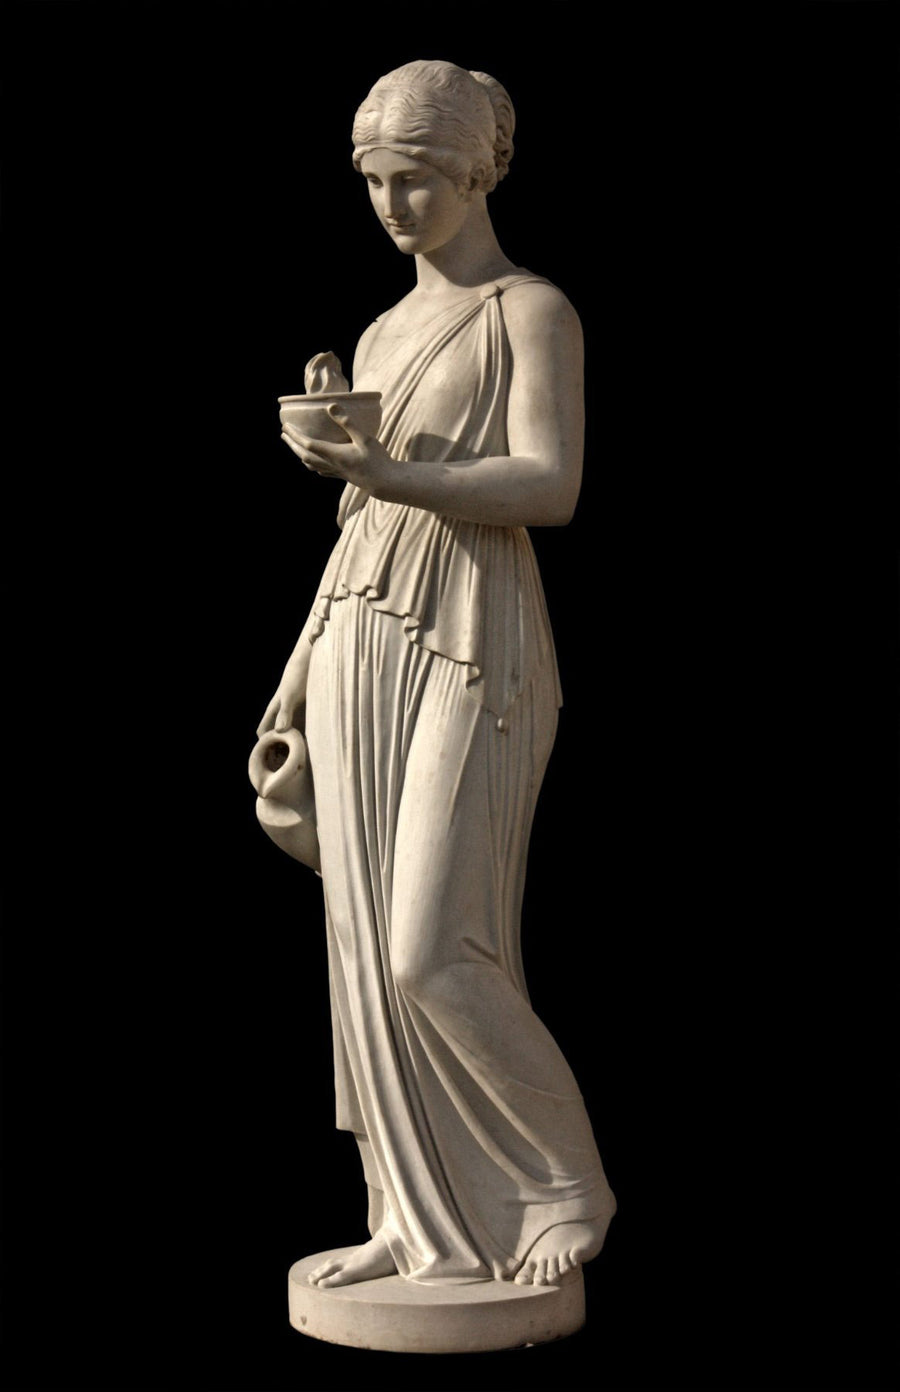 photo with black background of plaster cast sculpture of goddess Hebe in robes standing and holding a jug in right hand at her side and a bowl with a flame in left hand raised in front of her